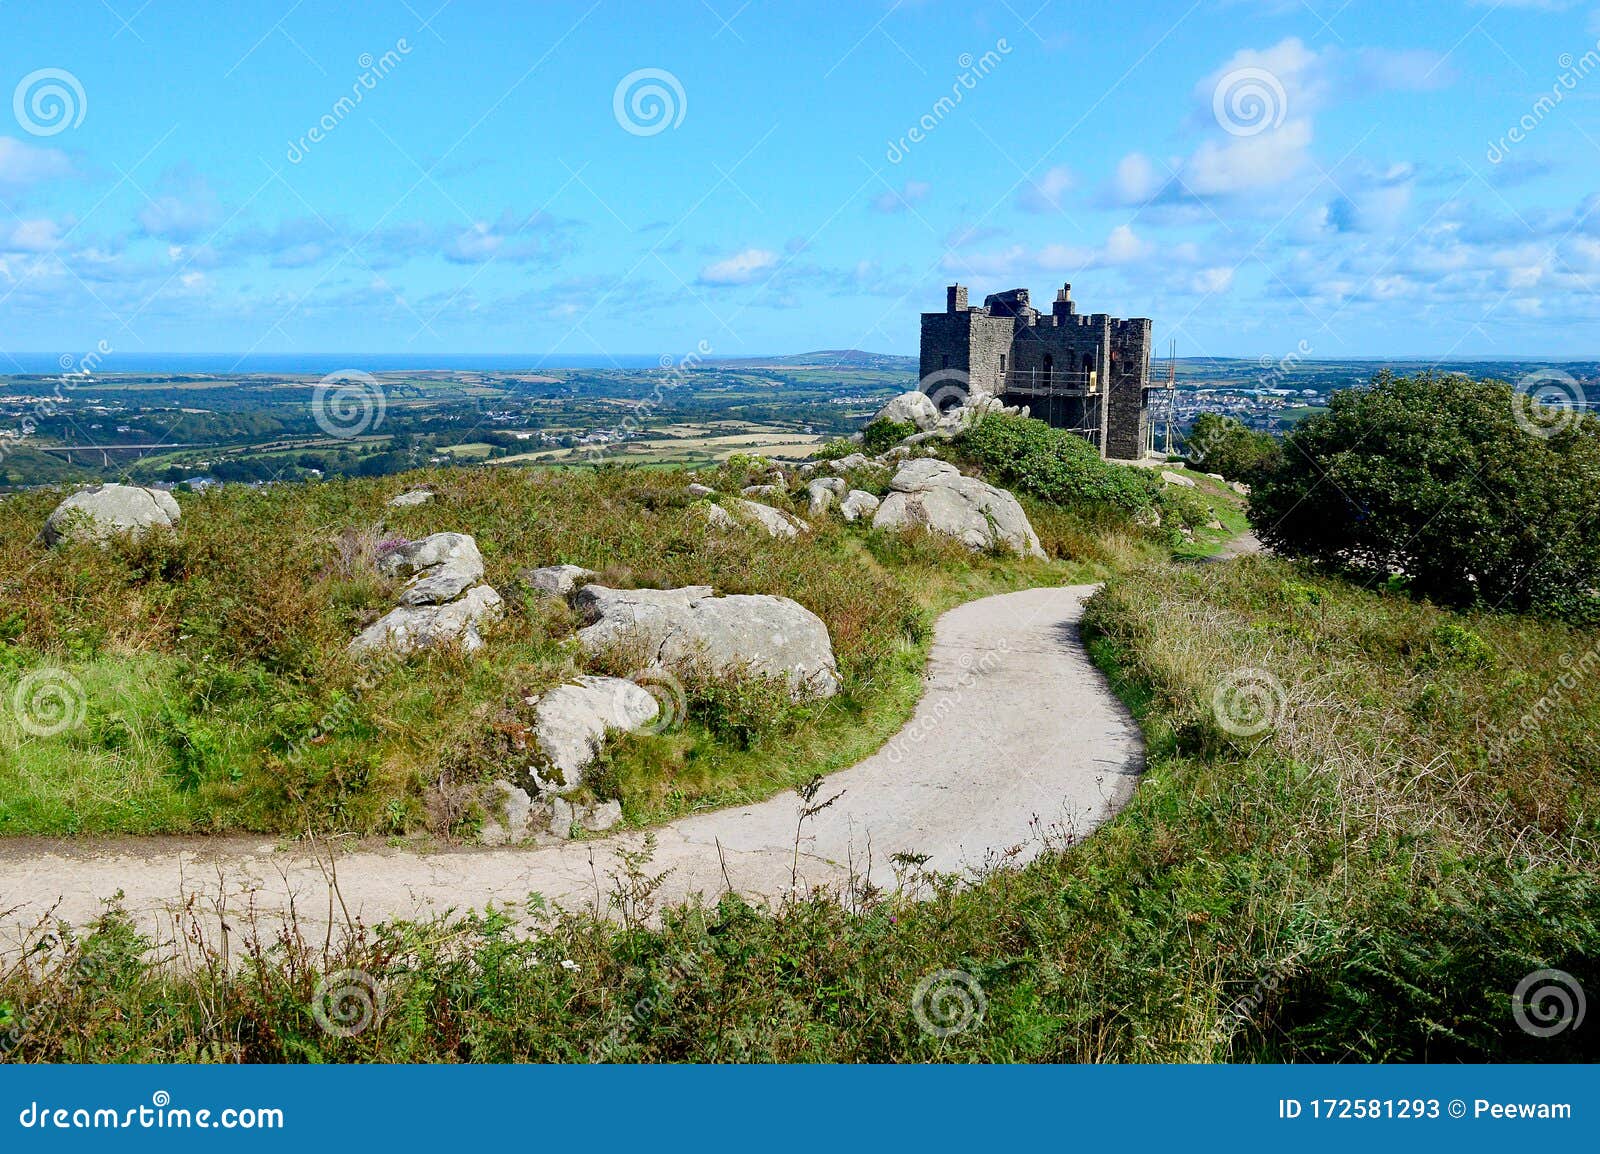 view over carn brea castle and redruth towards st agnes head from carn brea, cornwall